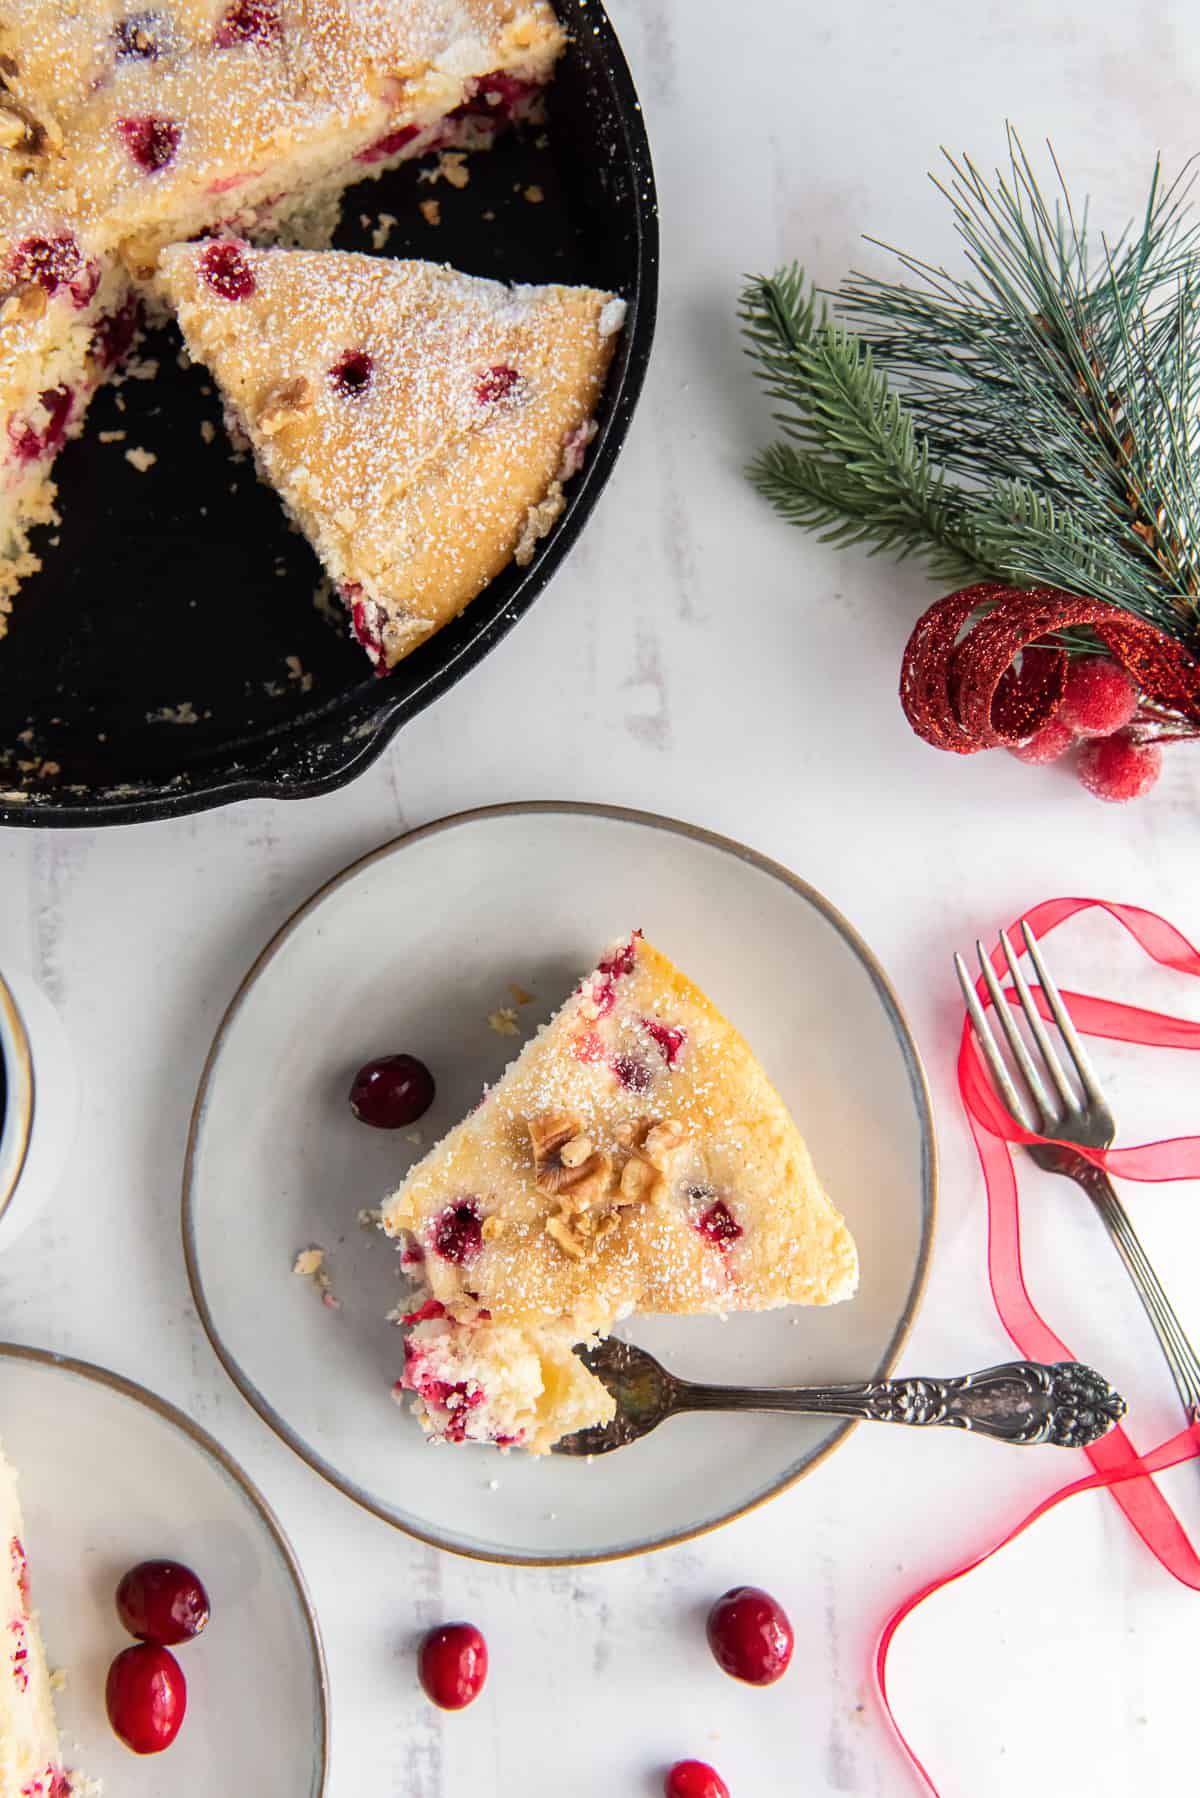 An over the top shot of a skillet cranberry cake next to a plate with a slice.